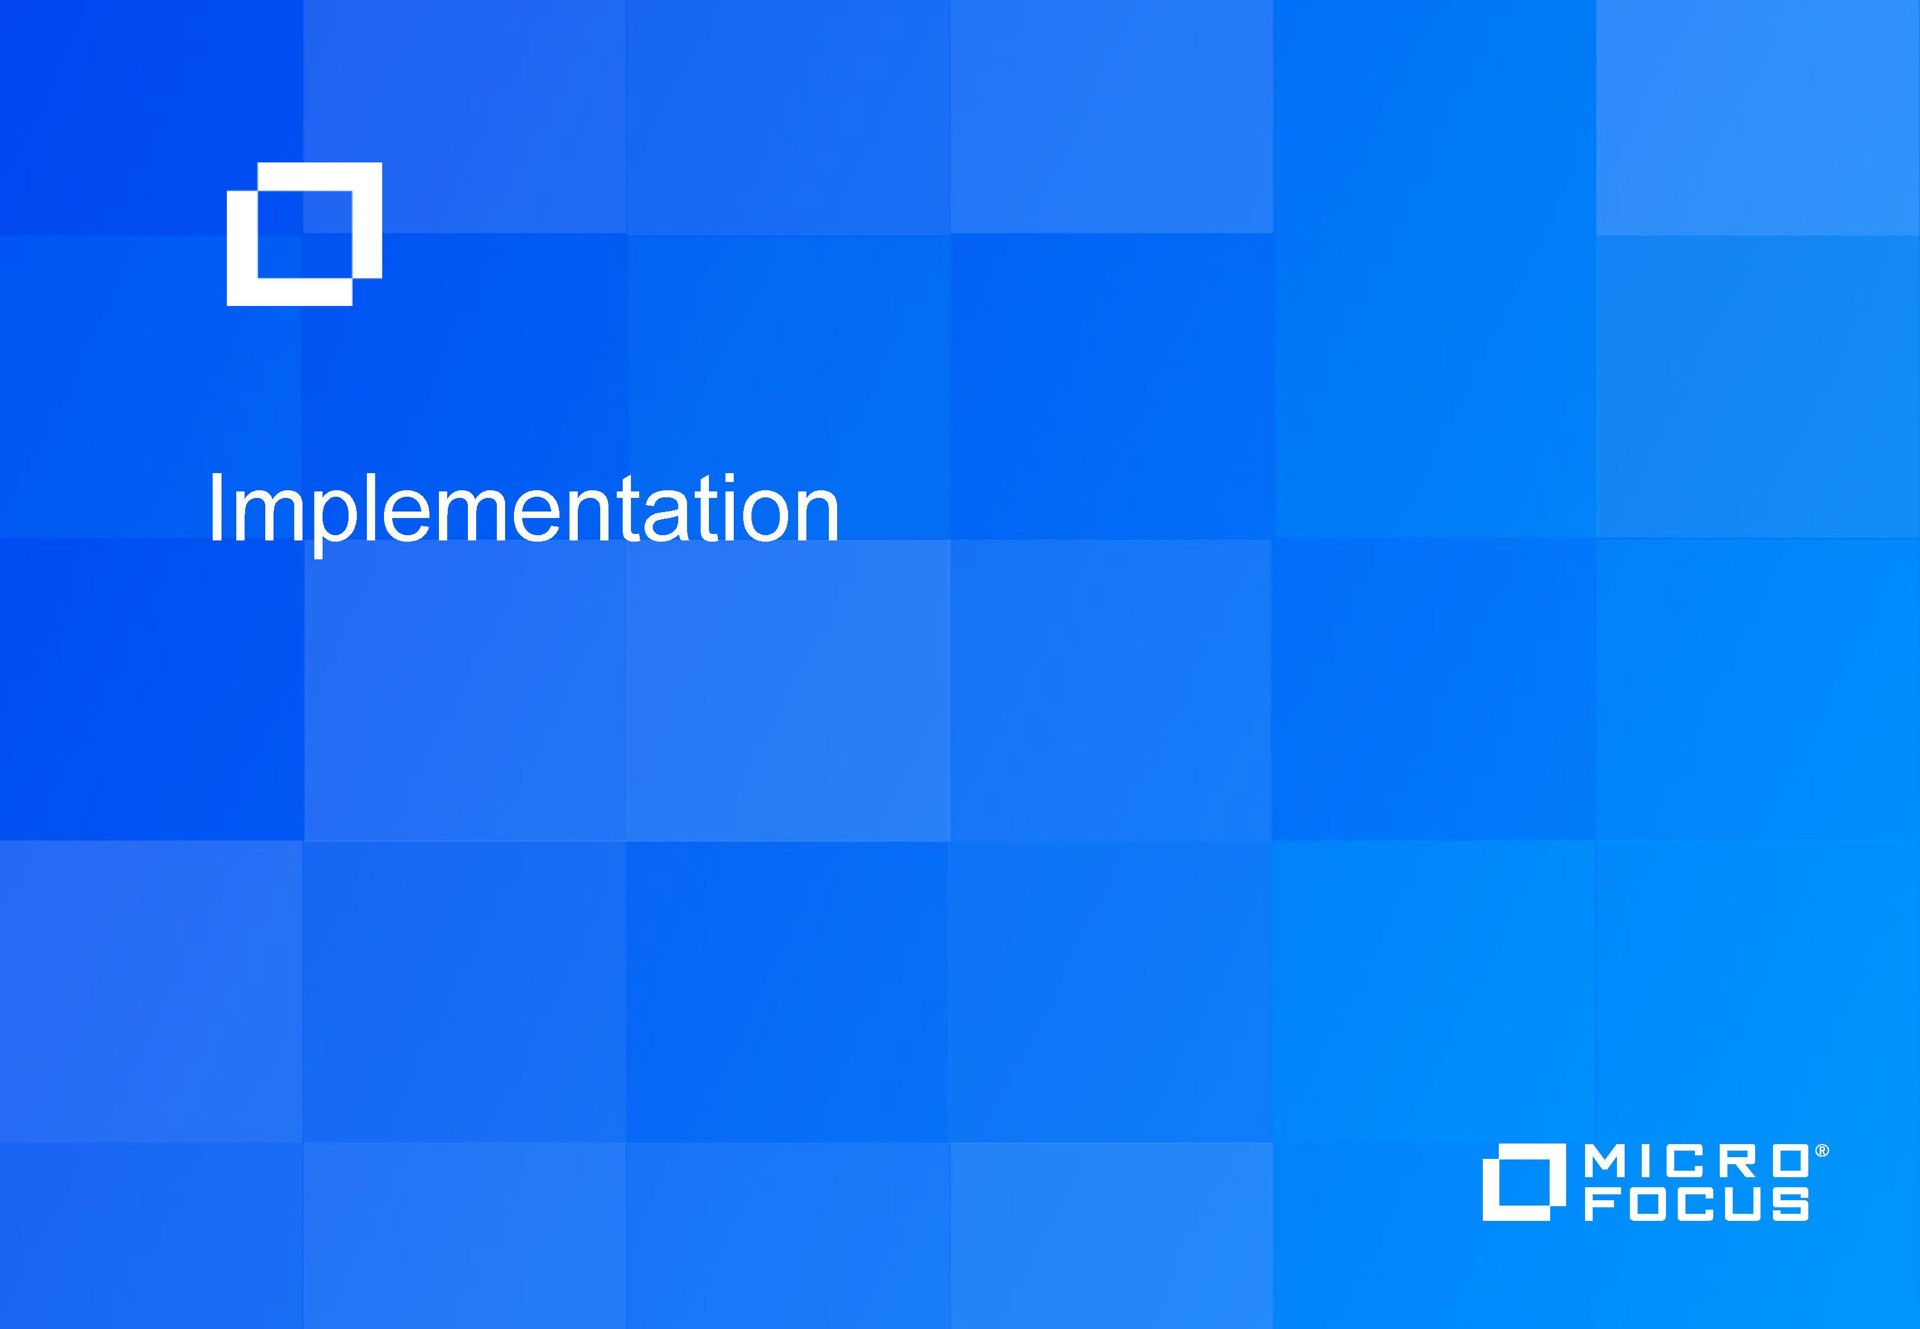 a implementation | Micro Focus